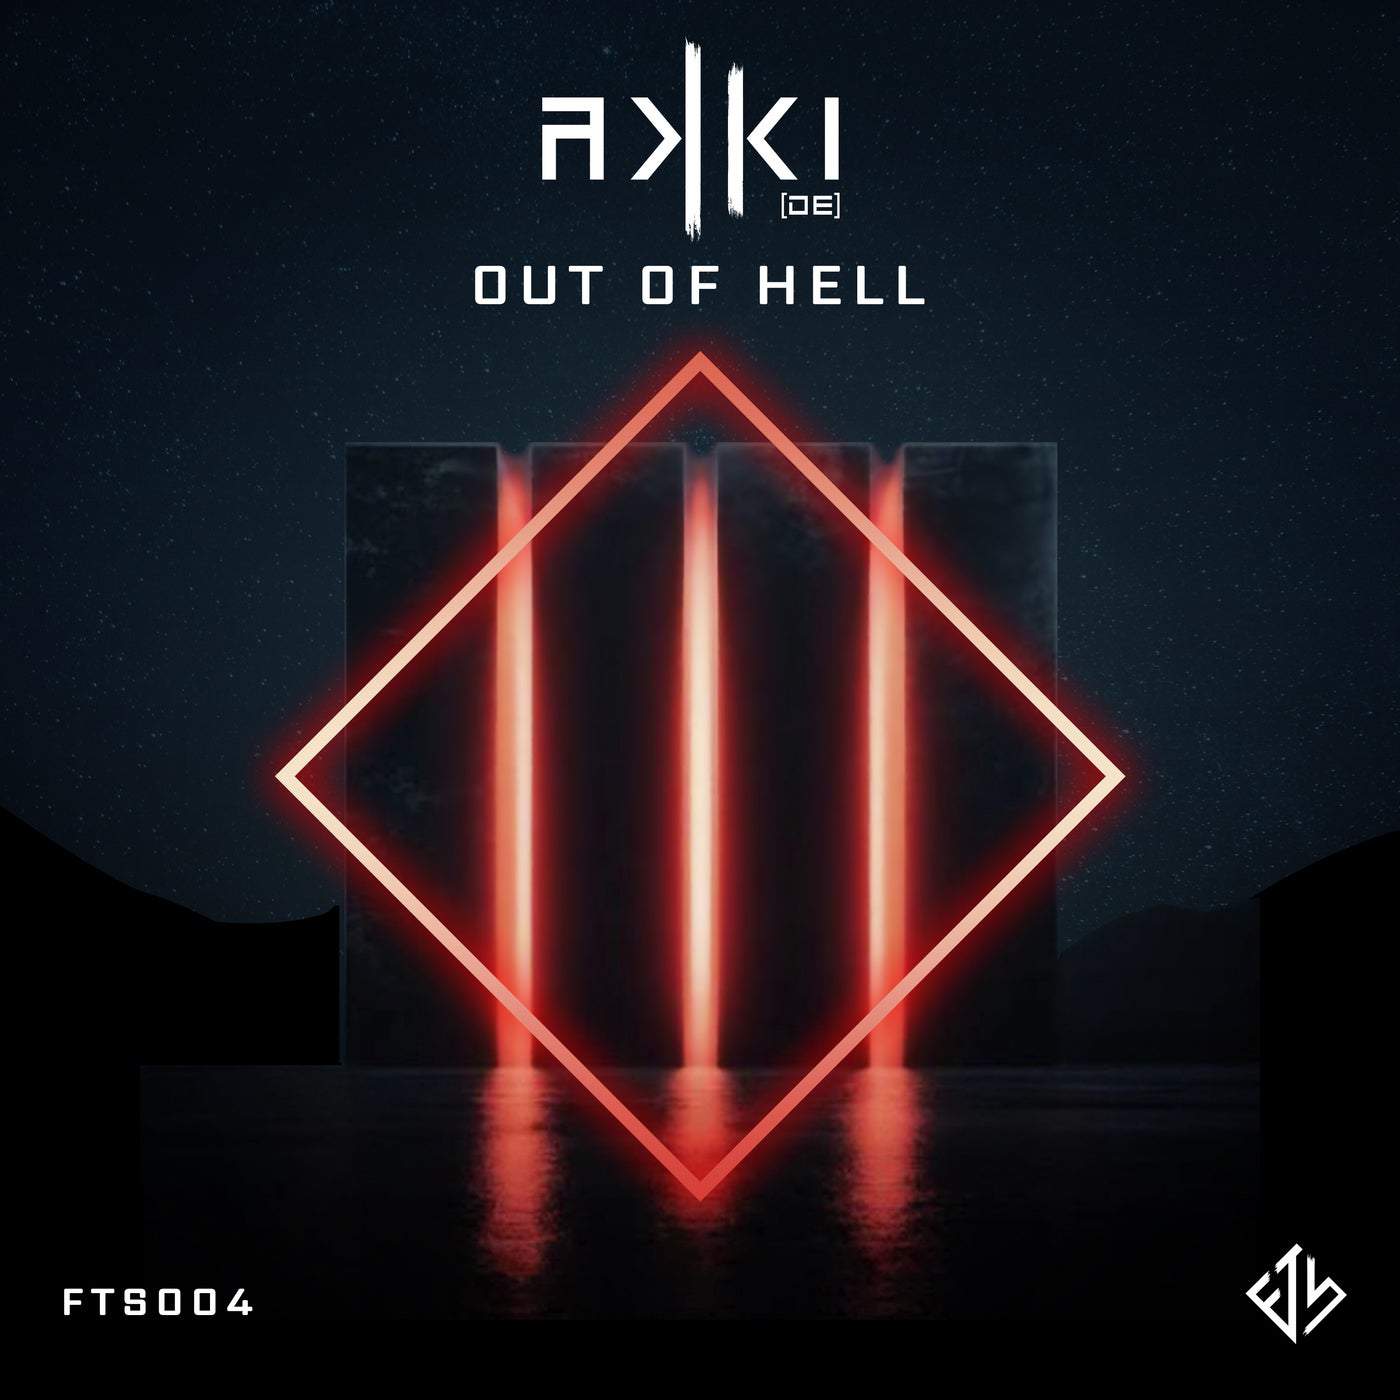 Download AKKI (DE) - Out of Hell - Extended Mix on Electrobuzz